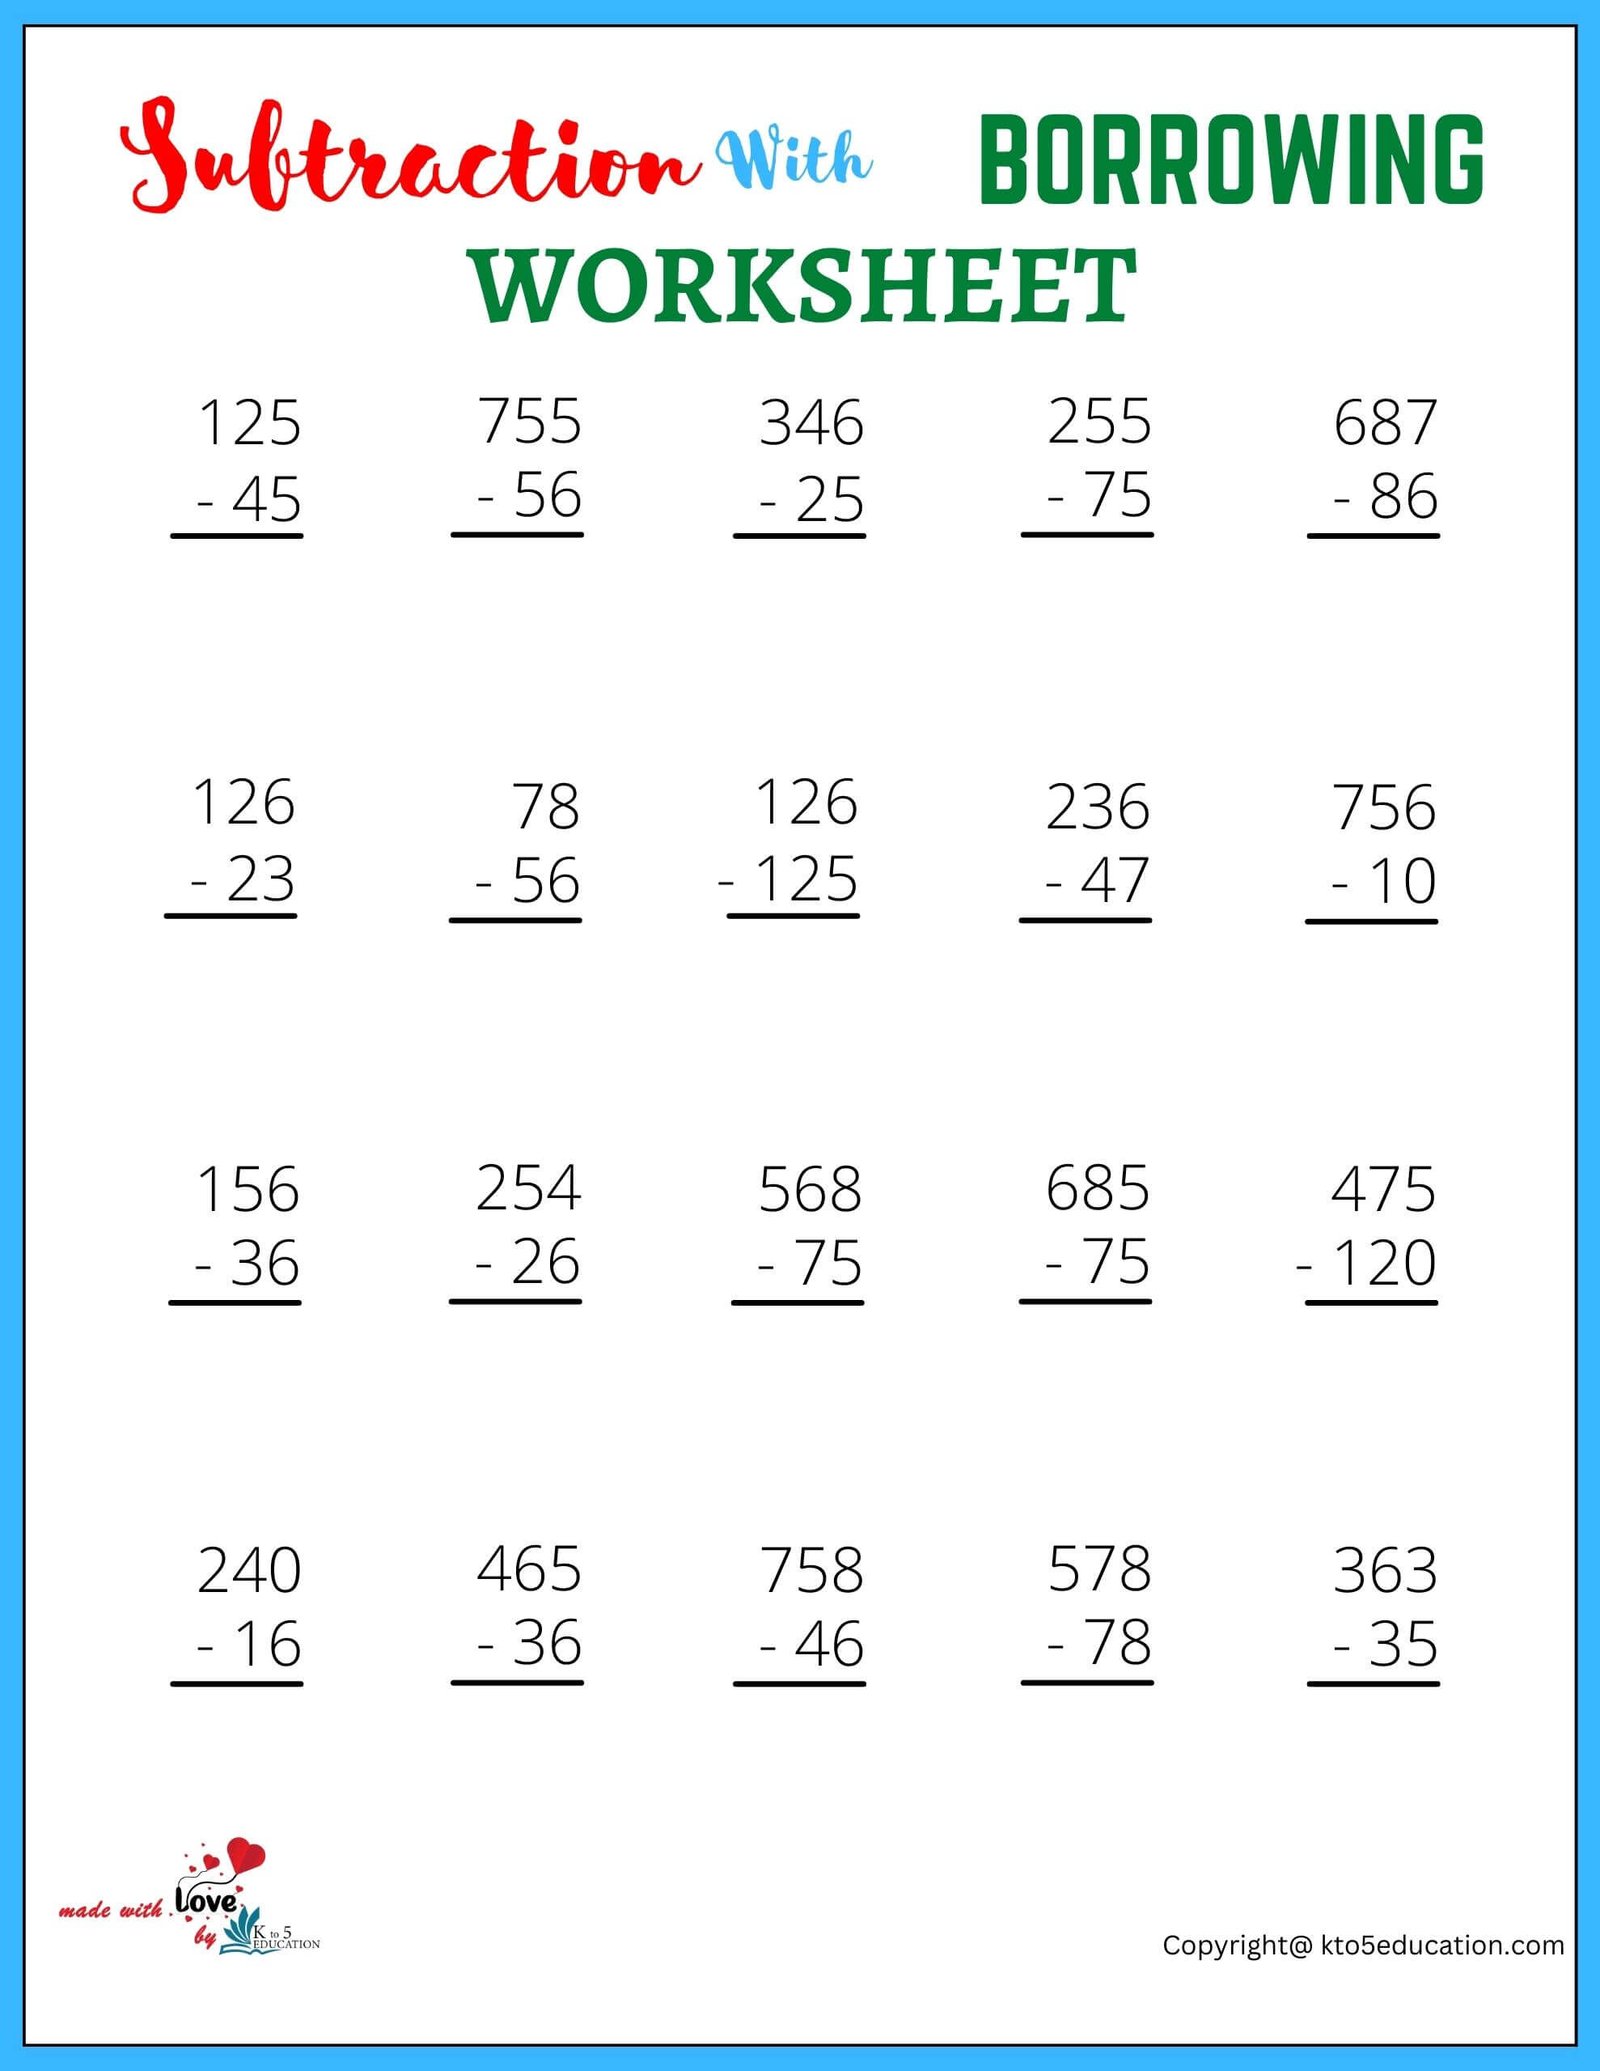 Subtraction With Borrowing Worksheet For 3rd Grade